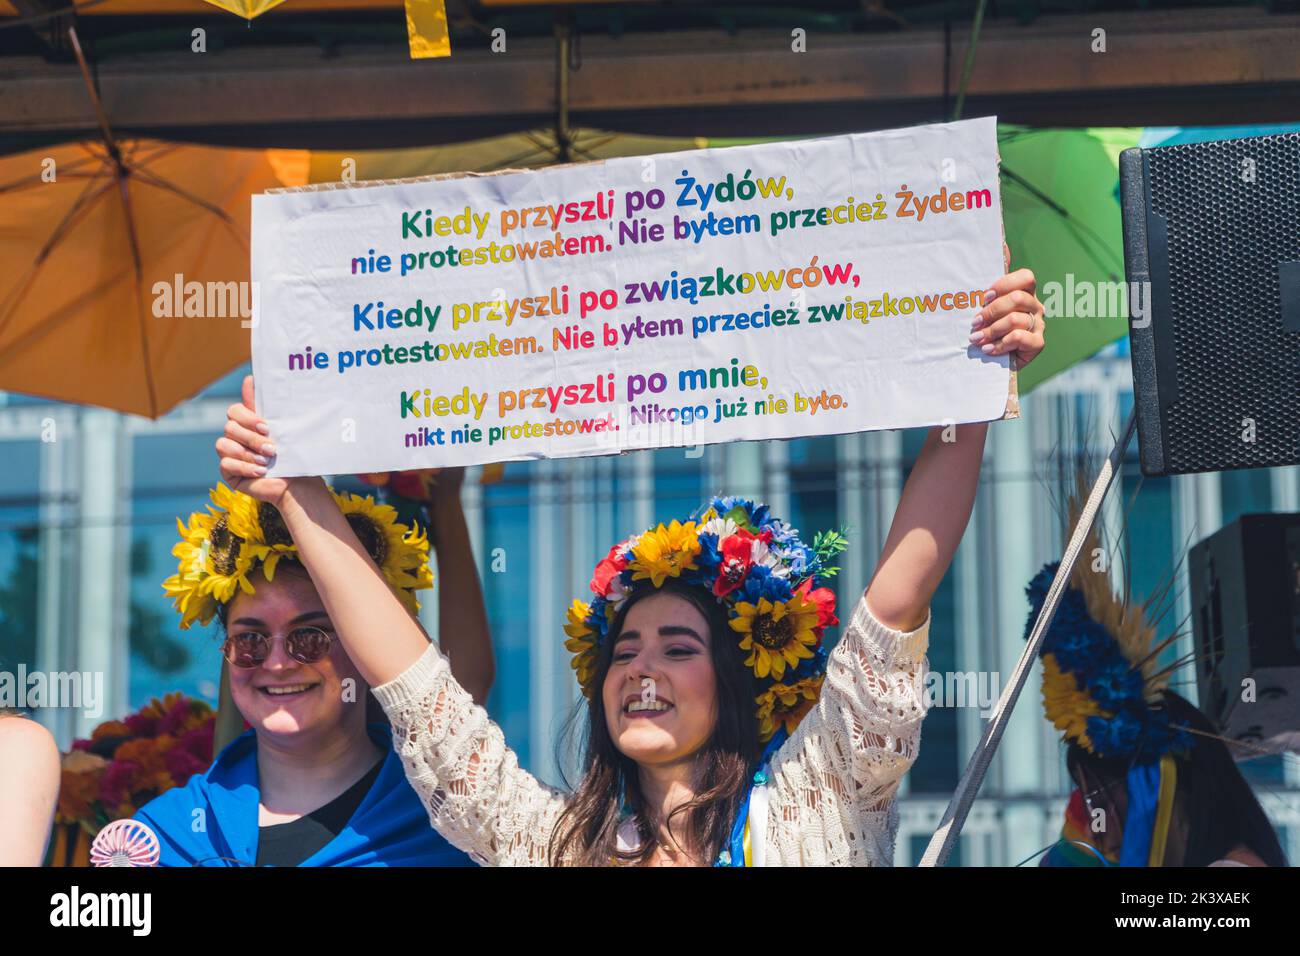 June 25, 2022 Warsaw, Poland - The Warsaw Equality Parade hosted the Kyiv Pride. Girls wearing Ukrainian national flower crowns, holding a powerful protest placard in support of Ukraine and the LGBTQ community. High quality photo Stock Photo